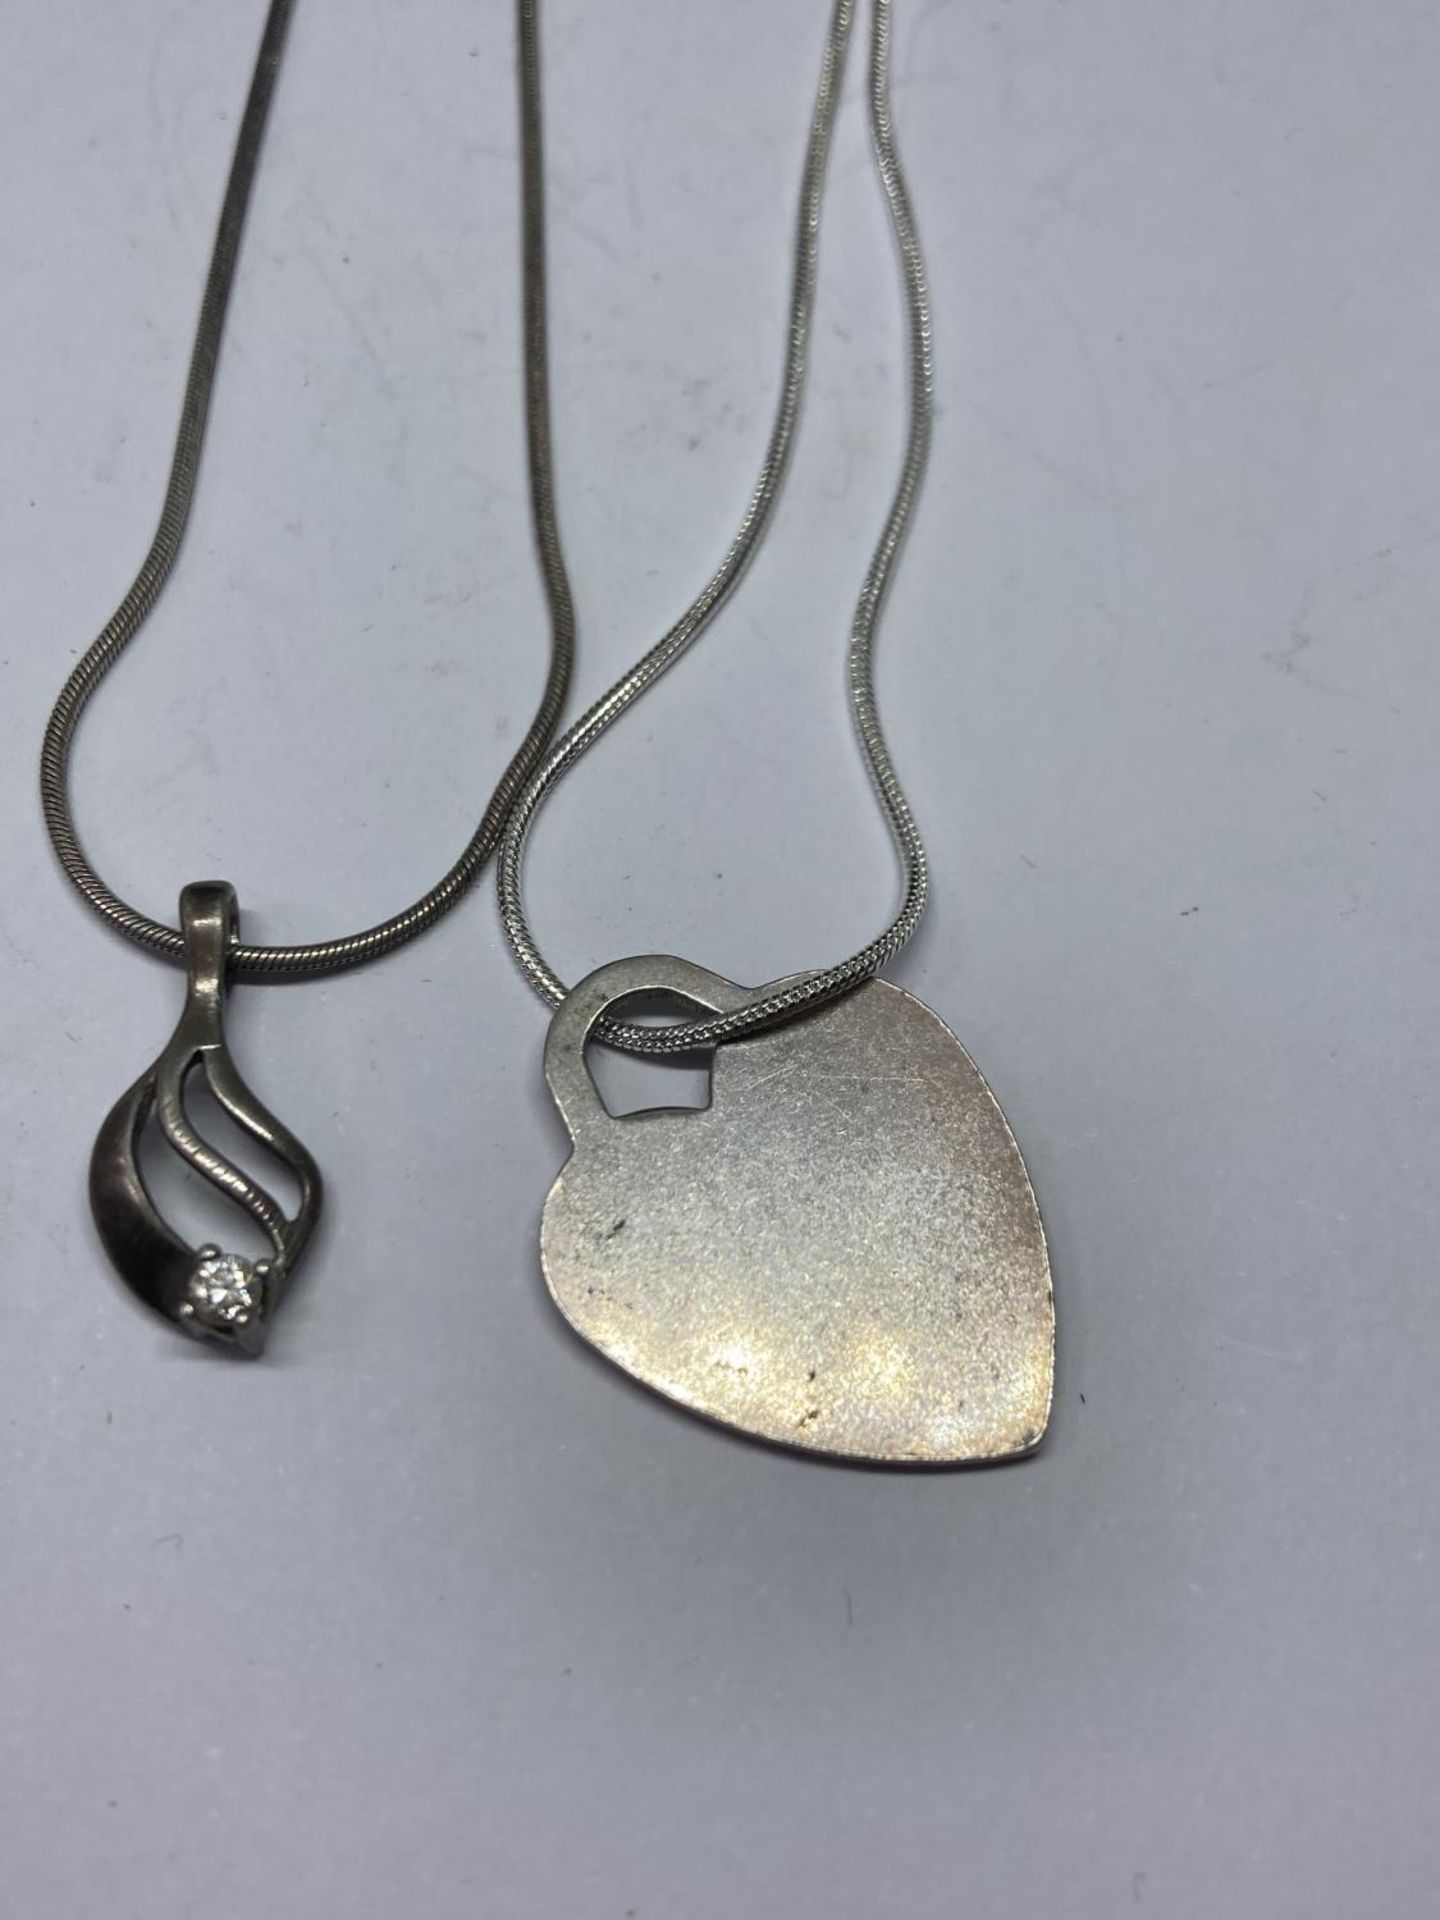 FOUR SILVER NECKLACES WITH PENDANTS - Image 3 of 3